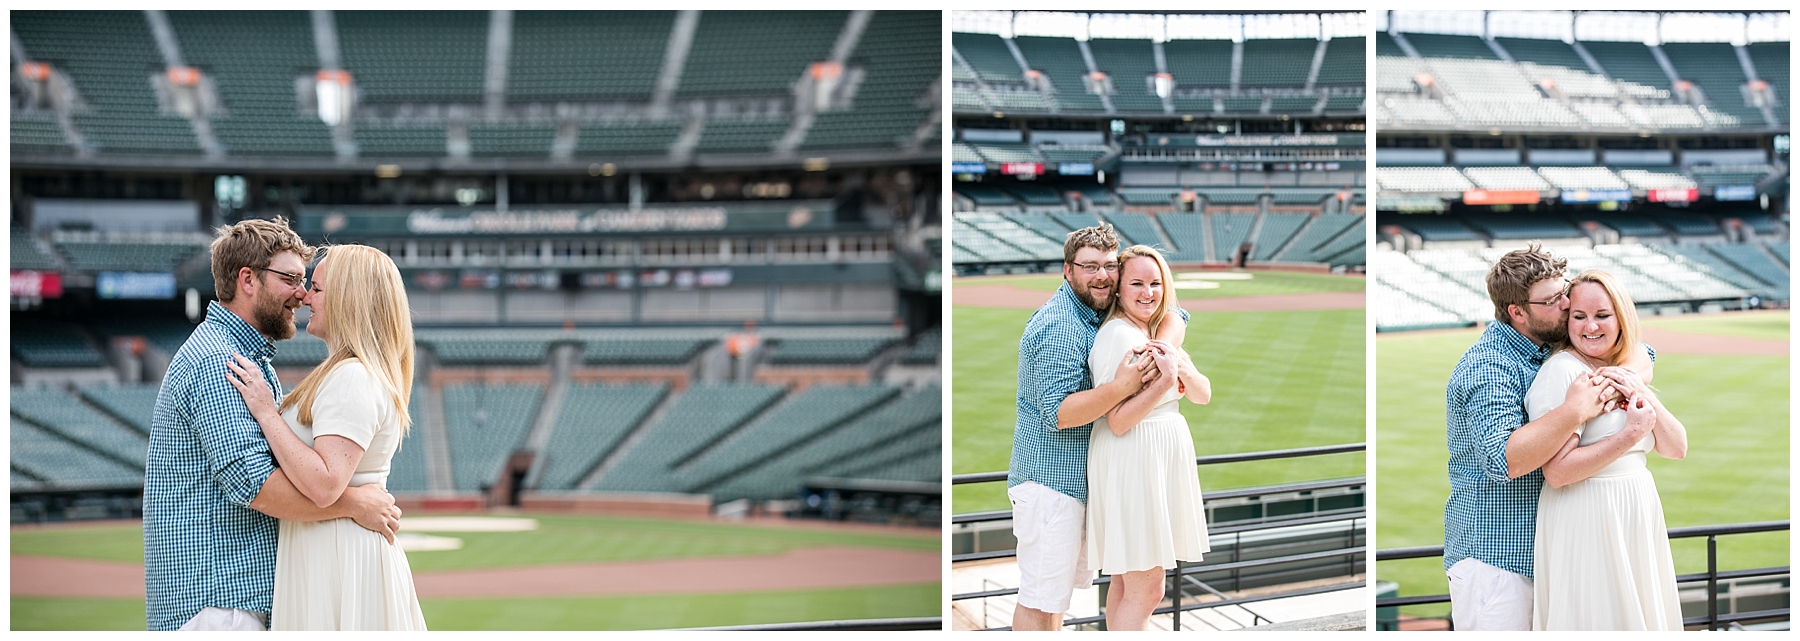 Tess Ray Camden Yards Engagement Session Living Radiant Photography photos_0028.jpg